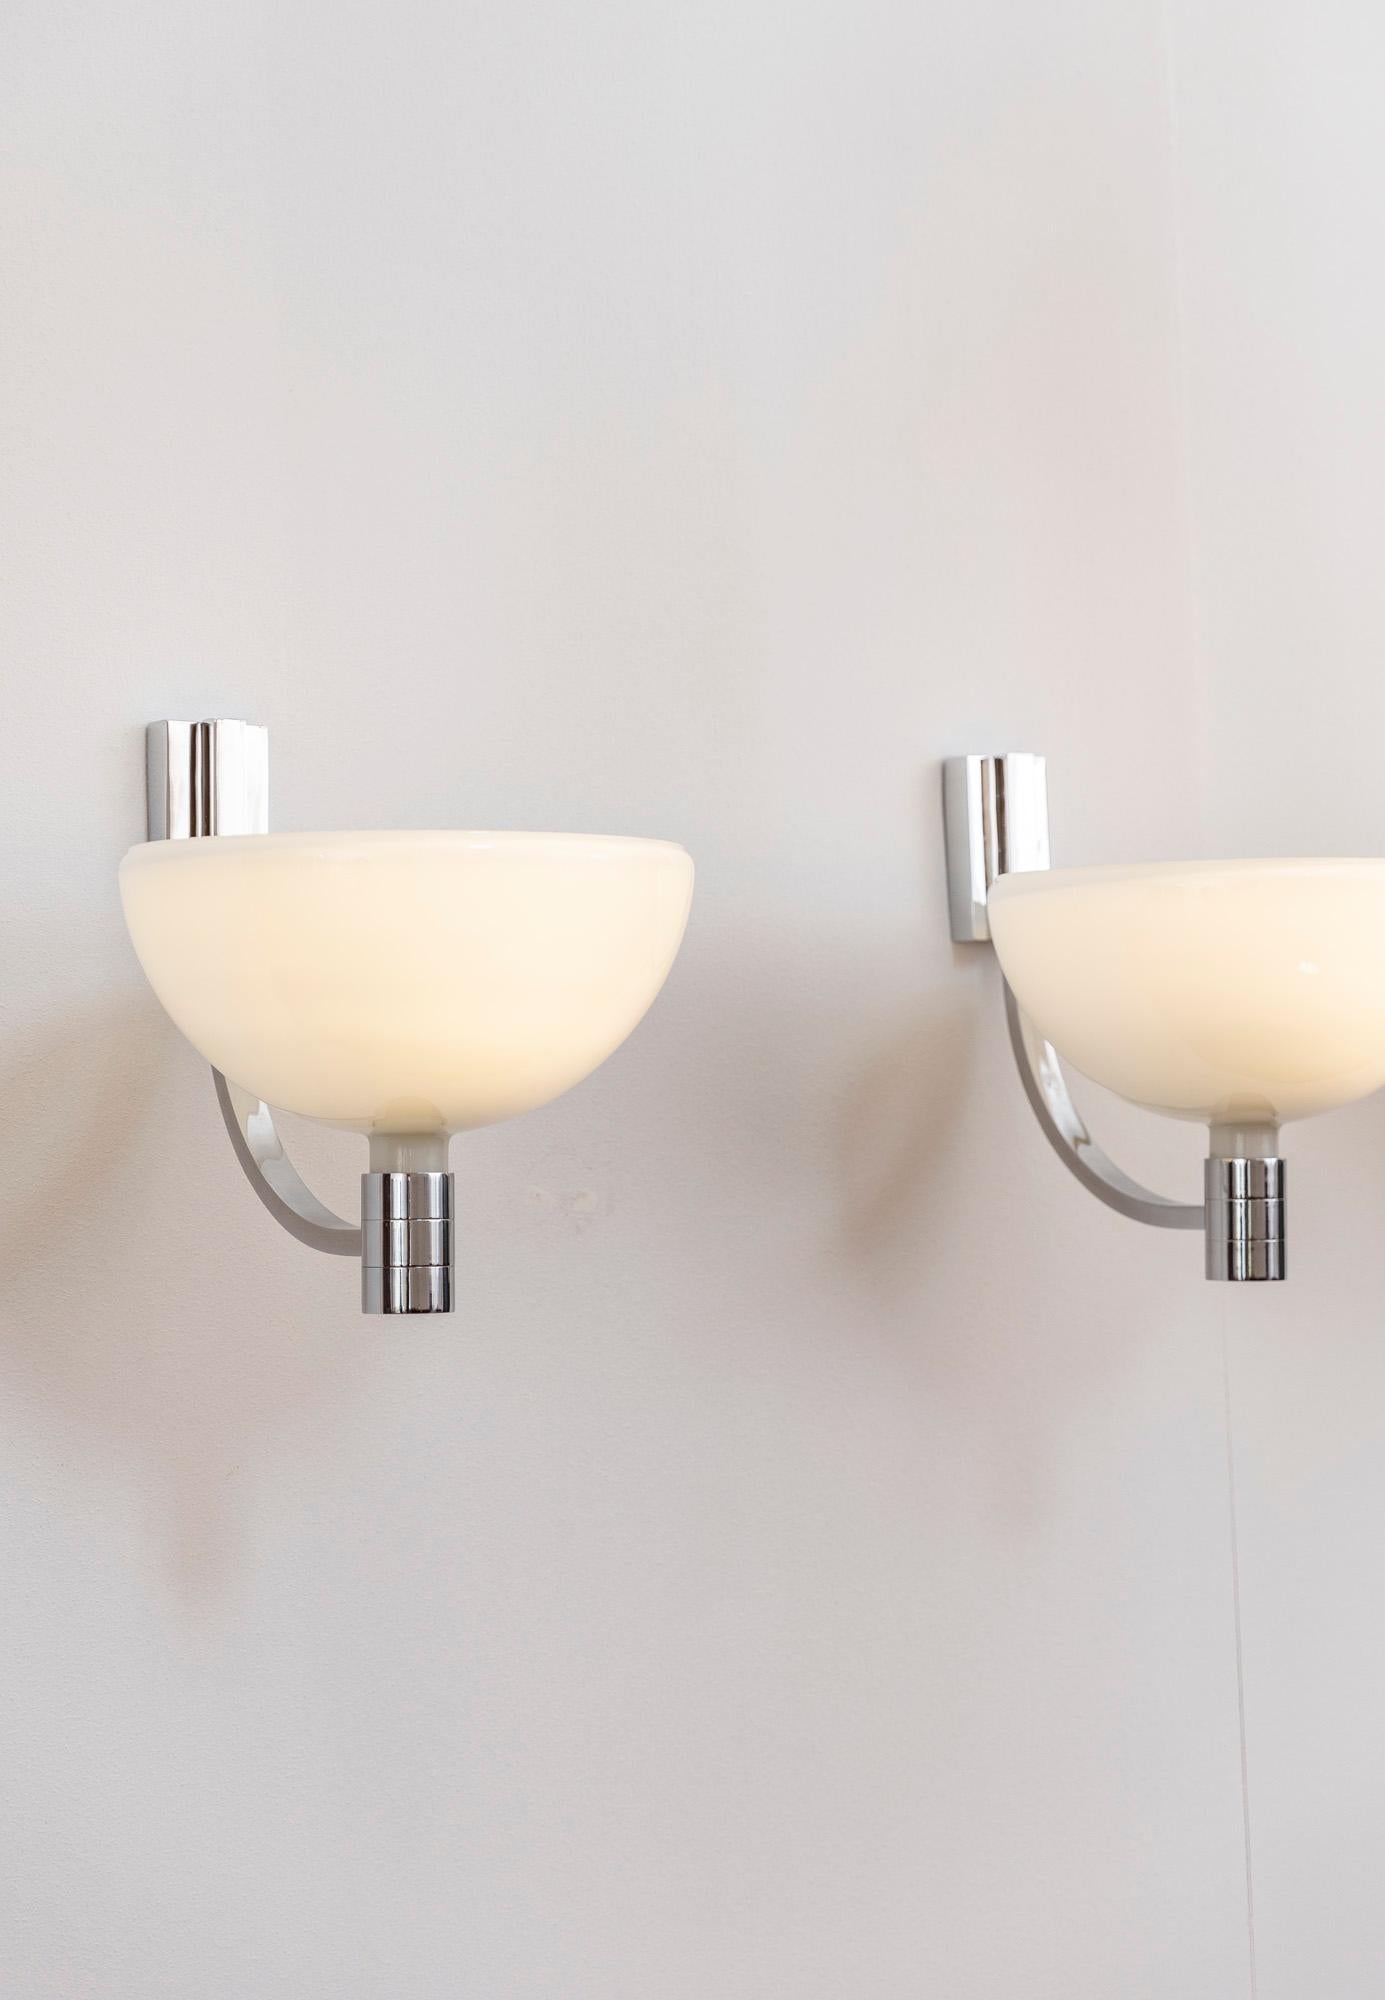 Set of midcentury Italian Wall Lights  by Franco Albini for Sirrah, 1968  For Sale 4